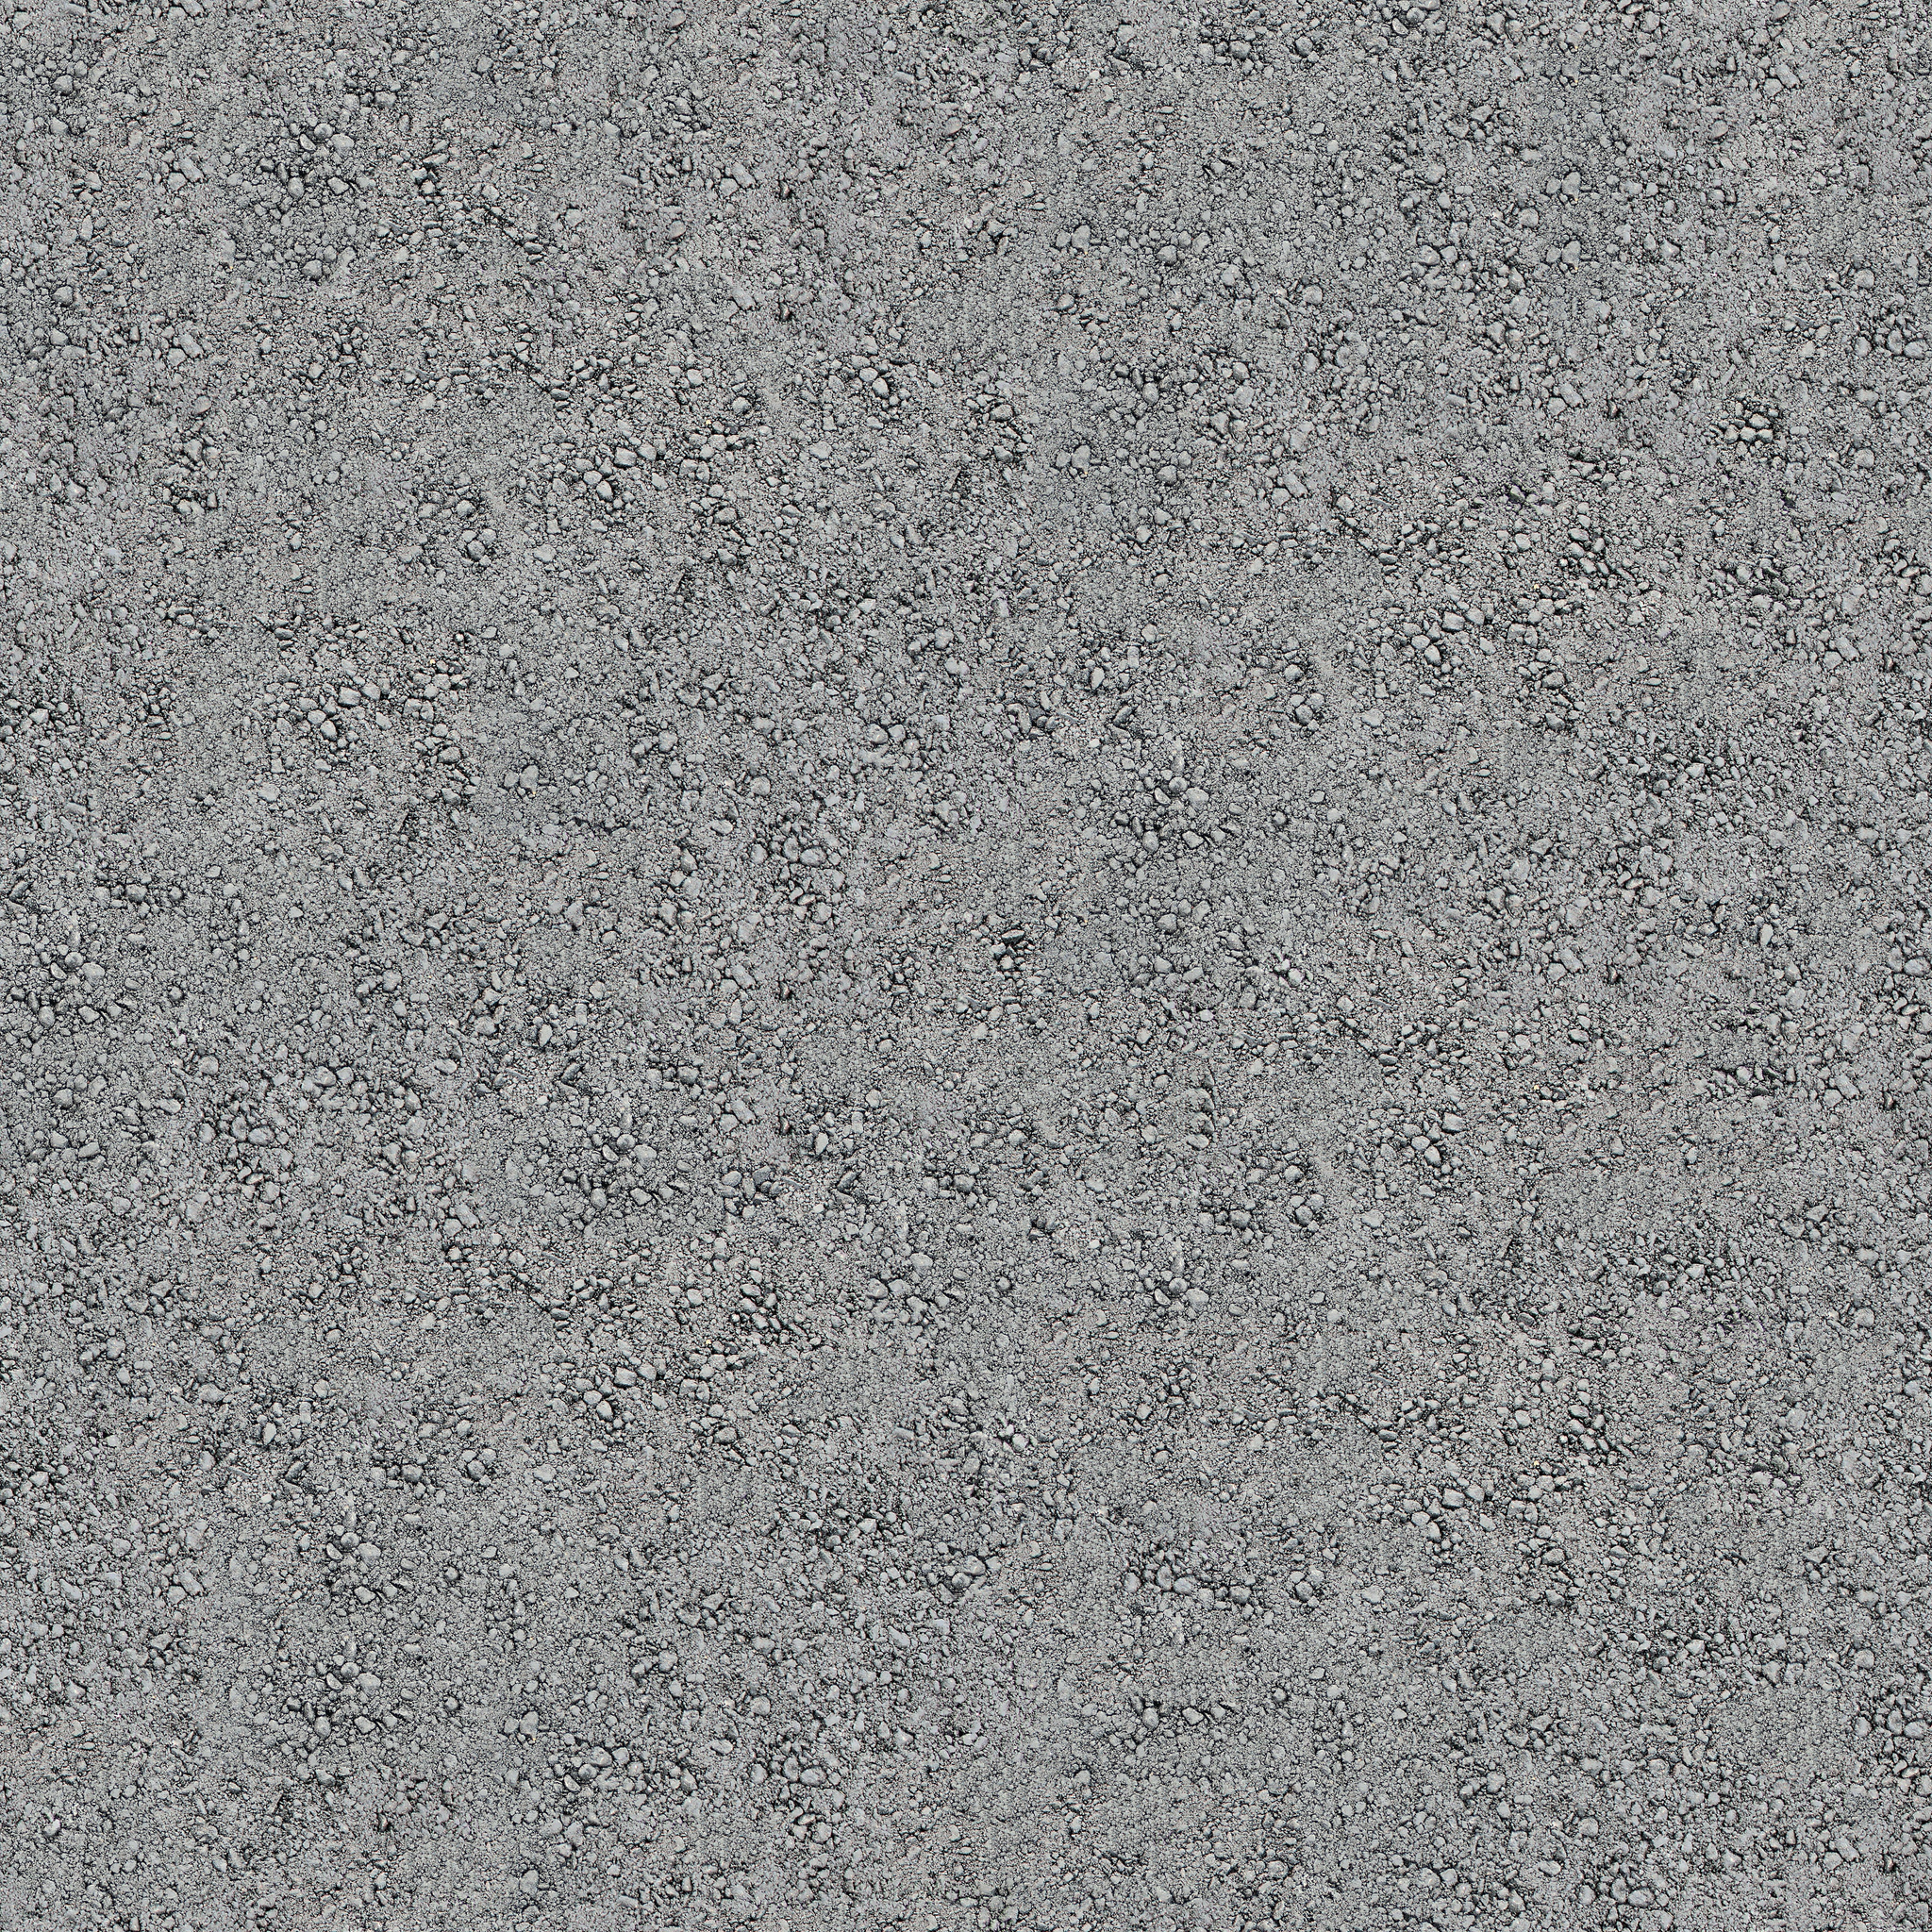 A Gray Rough Surface in Square Format 